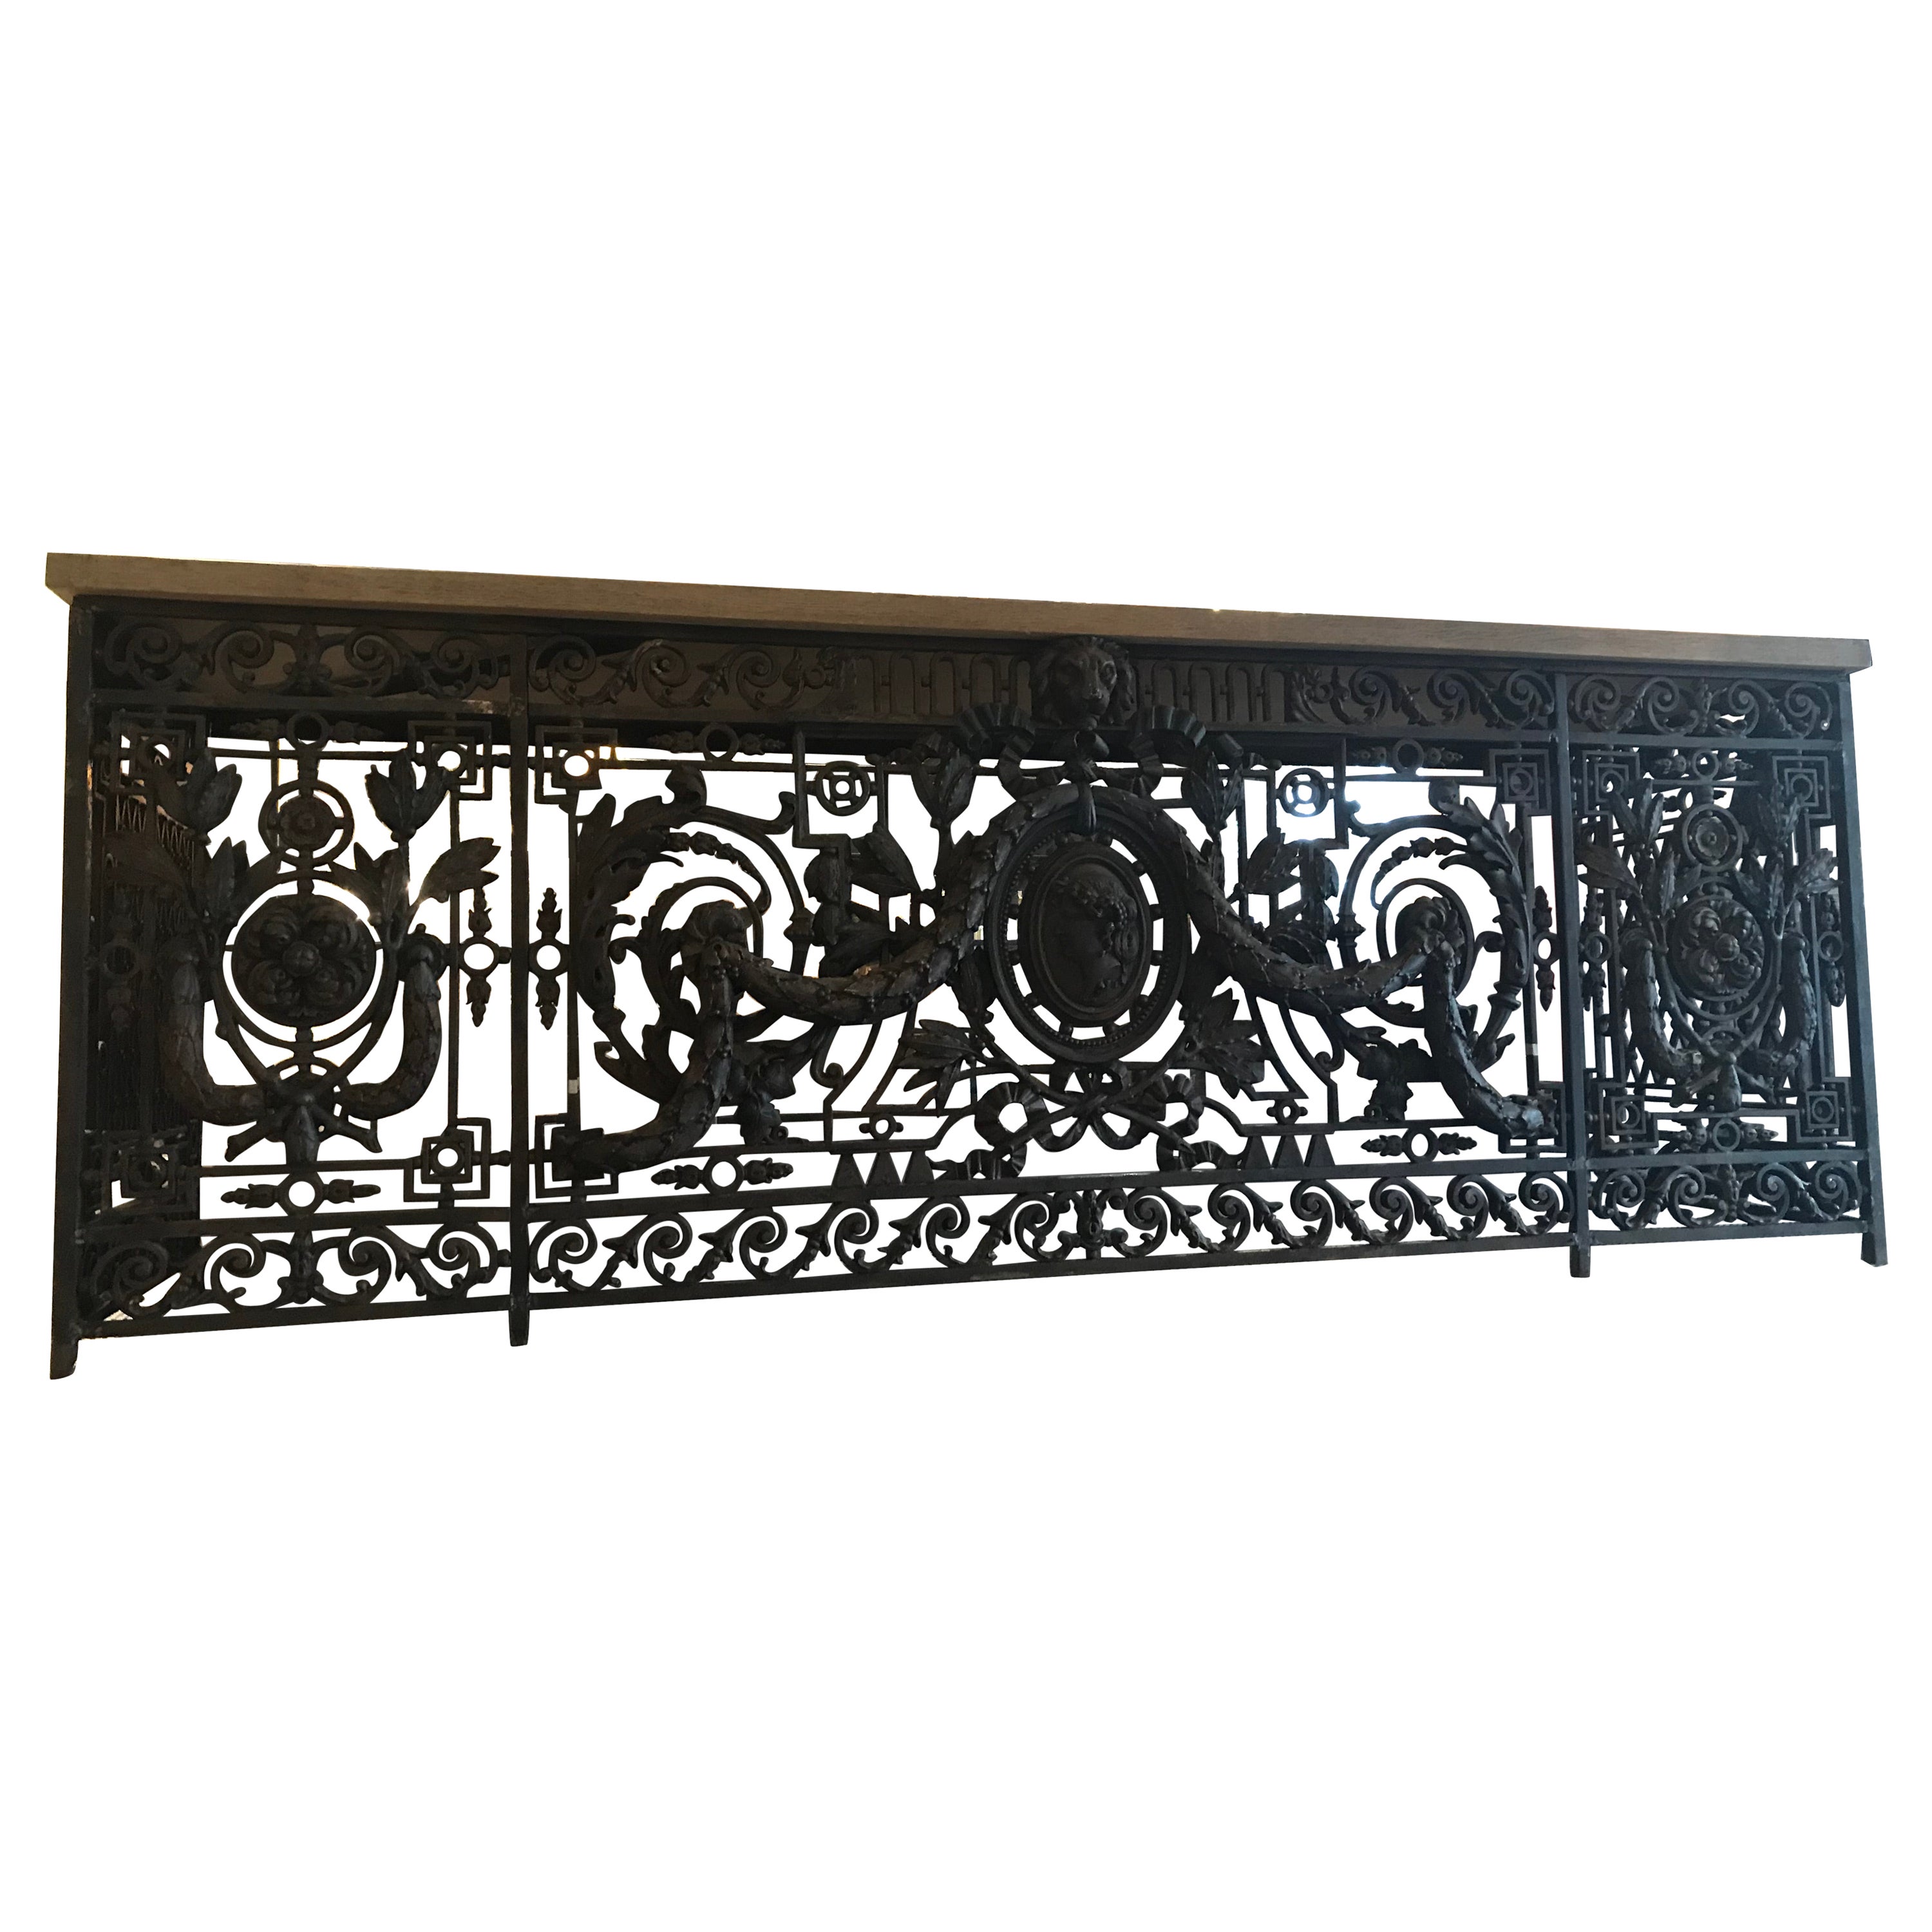 A Magnificent French Cast Iron Balcony, now converted to console. 